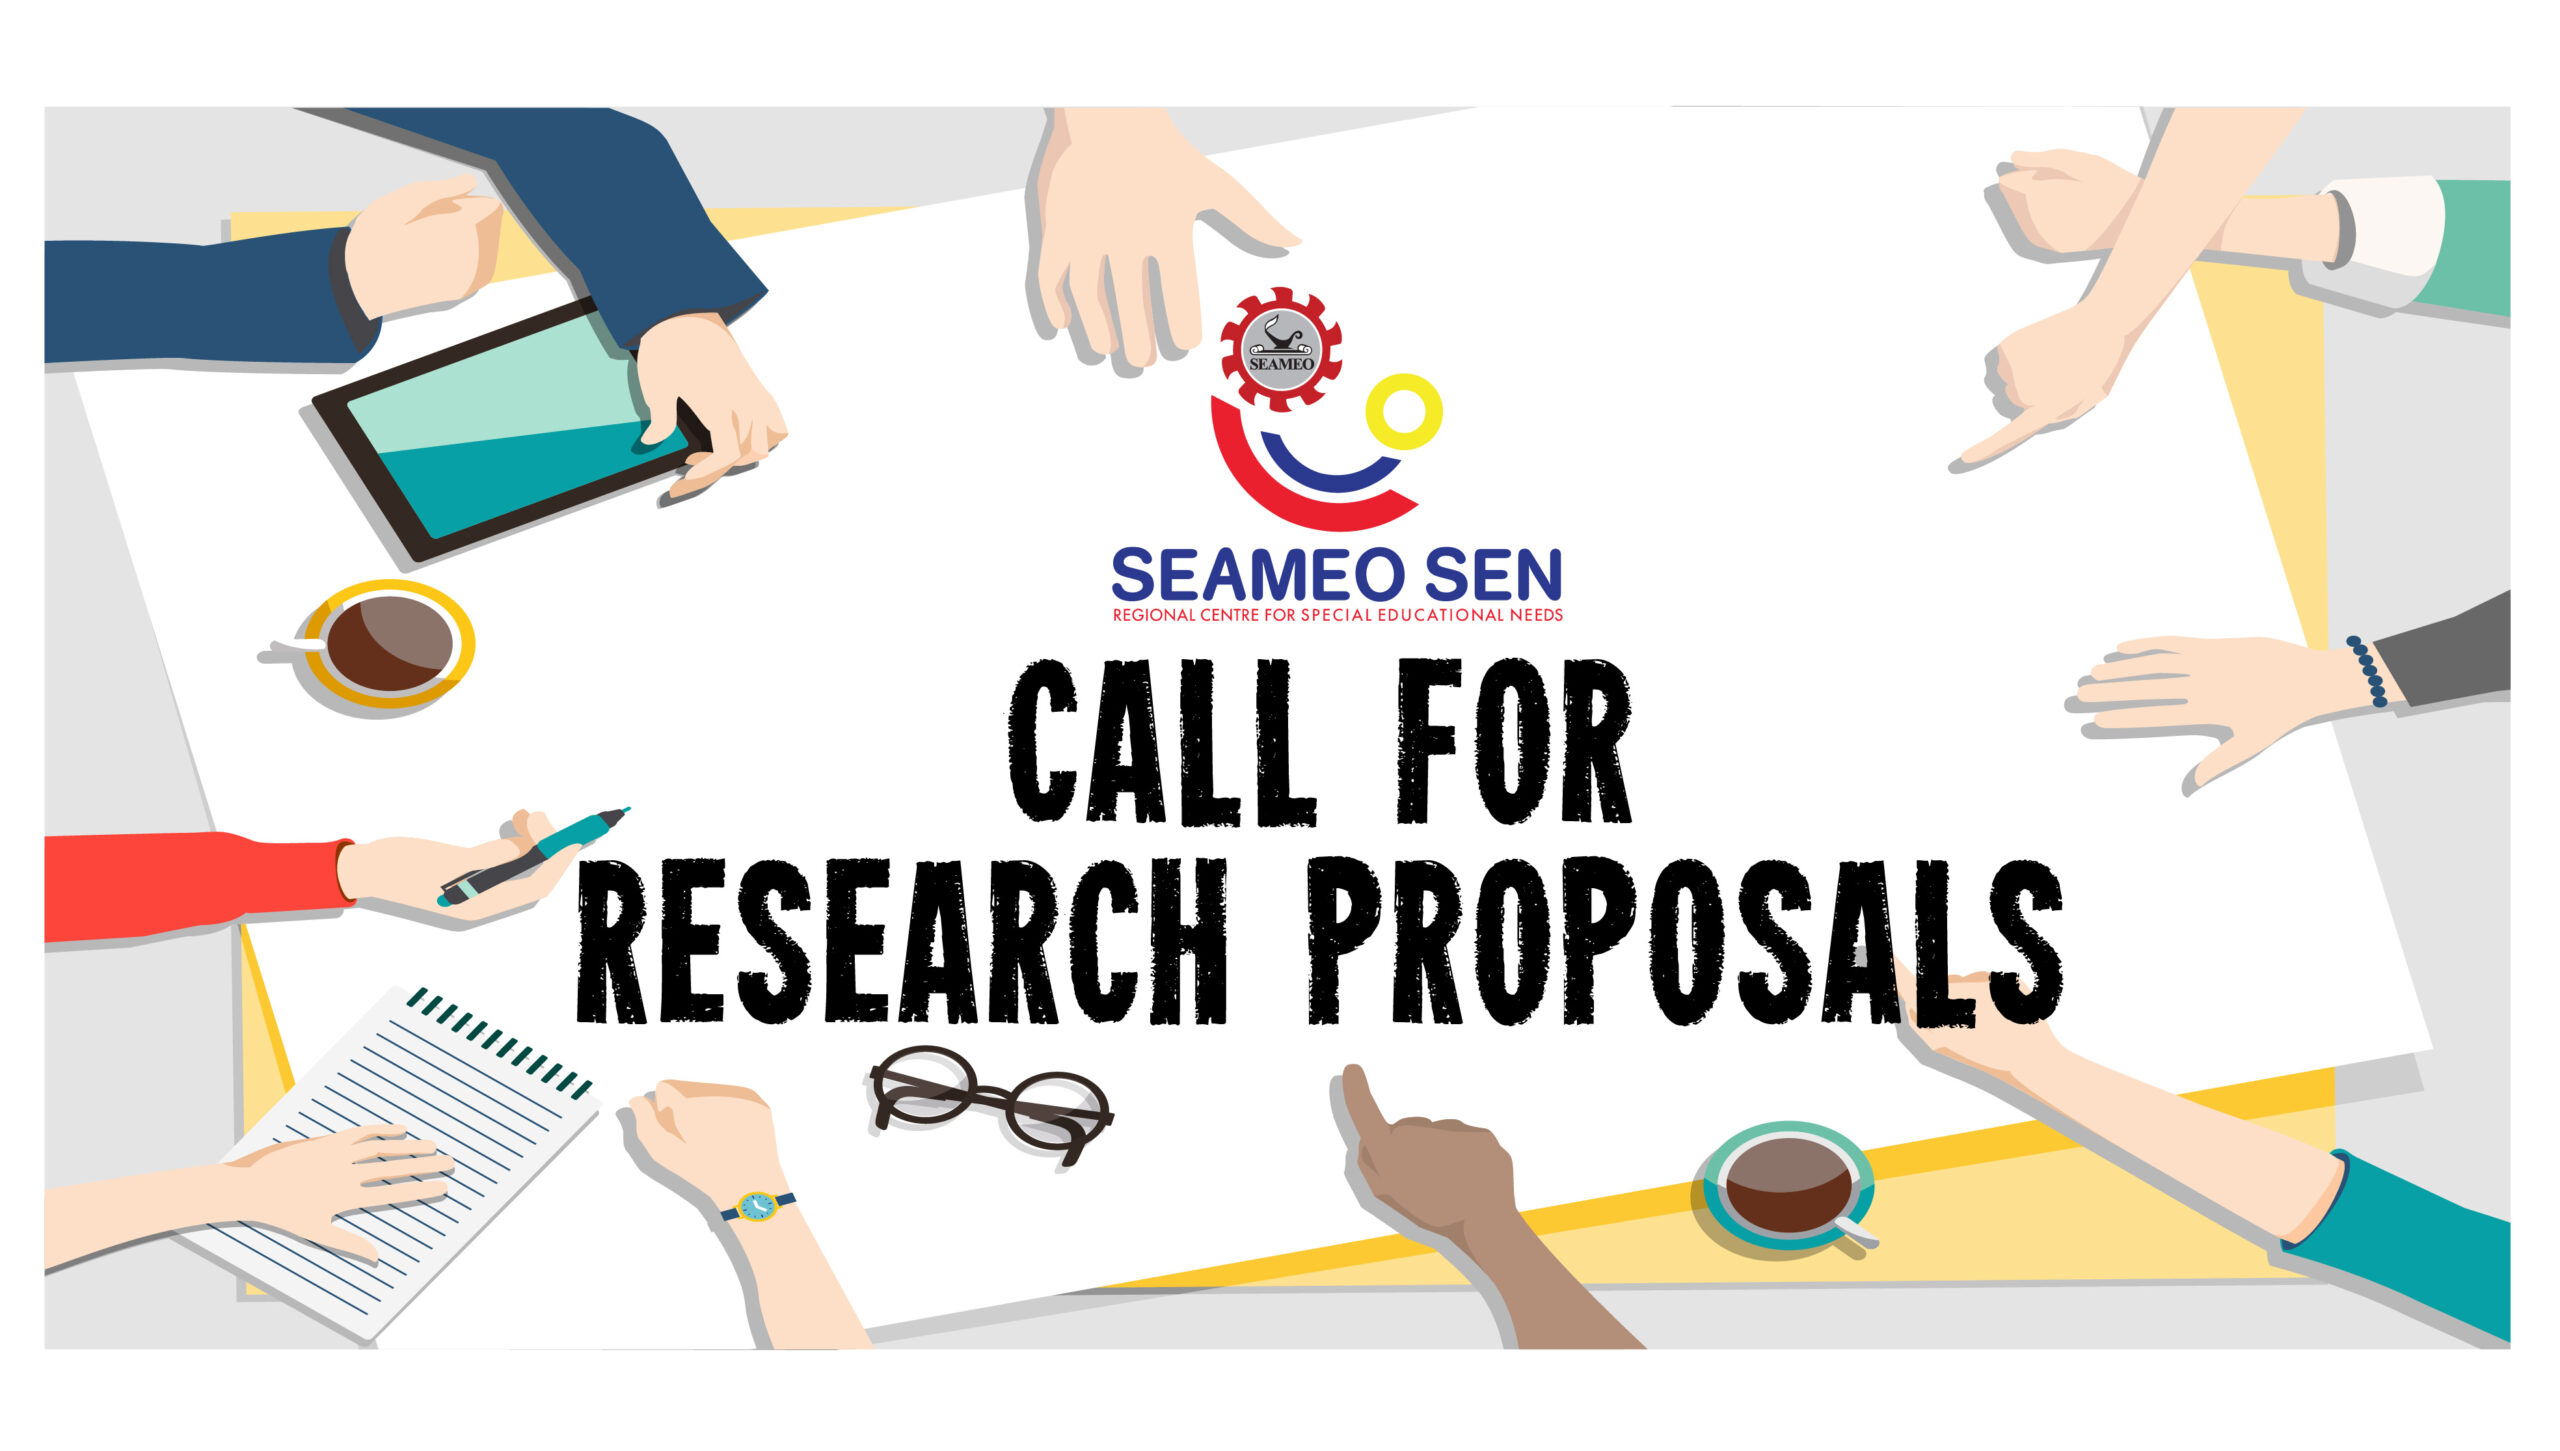 Call for Research Proposals “Adaptability of Caregiver Skills Training Module in Malaysian Settings”